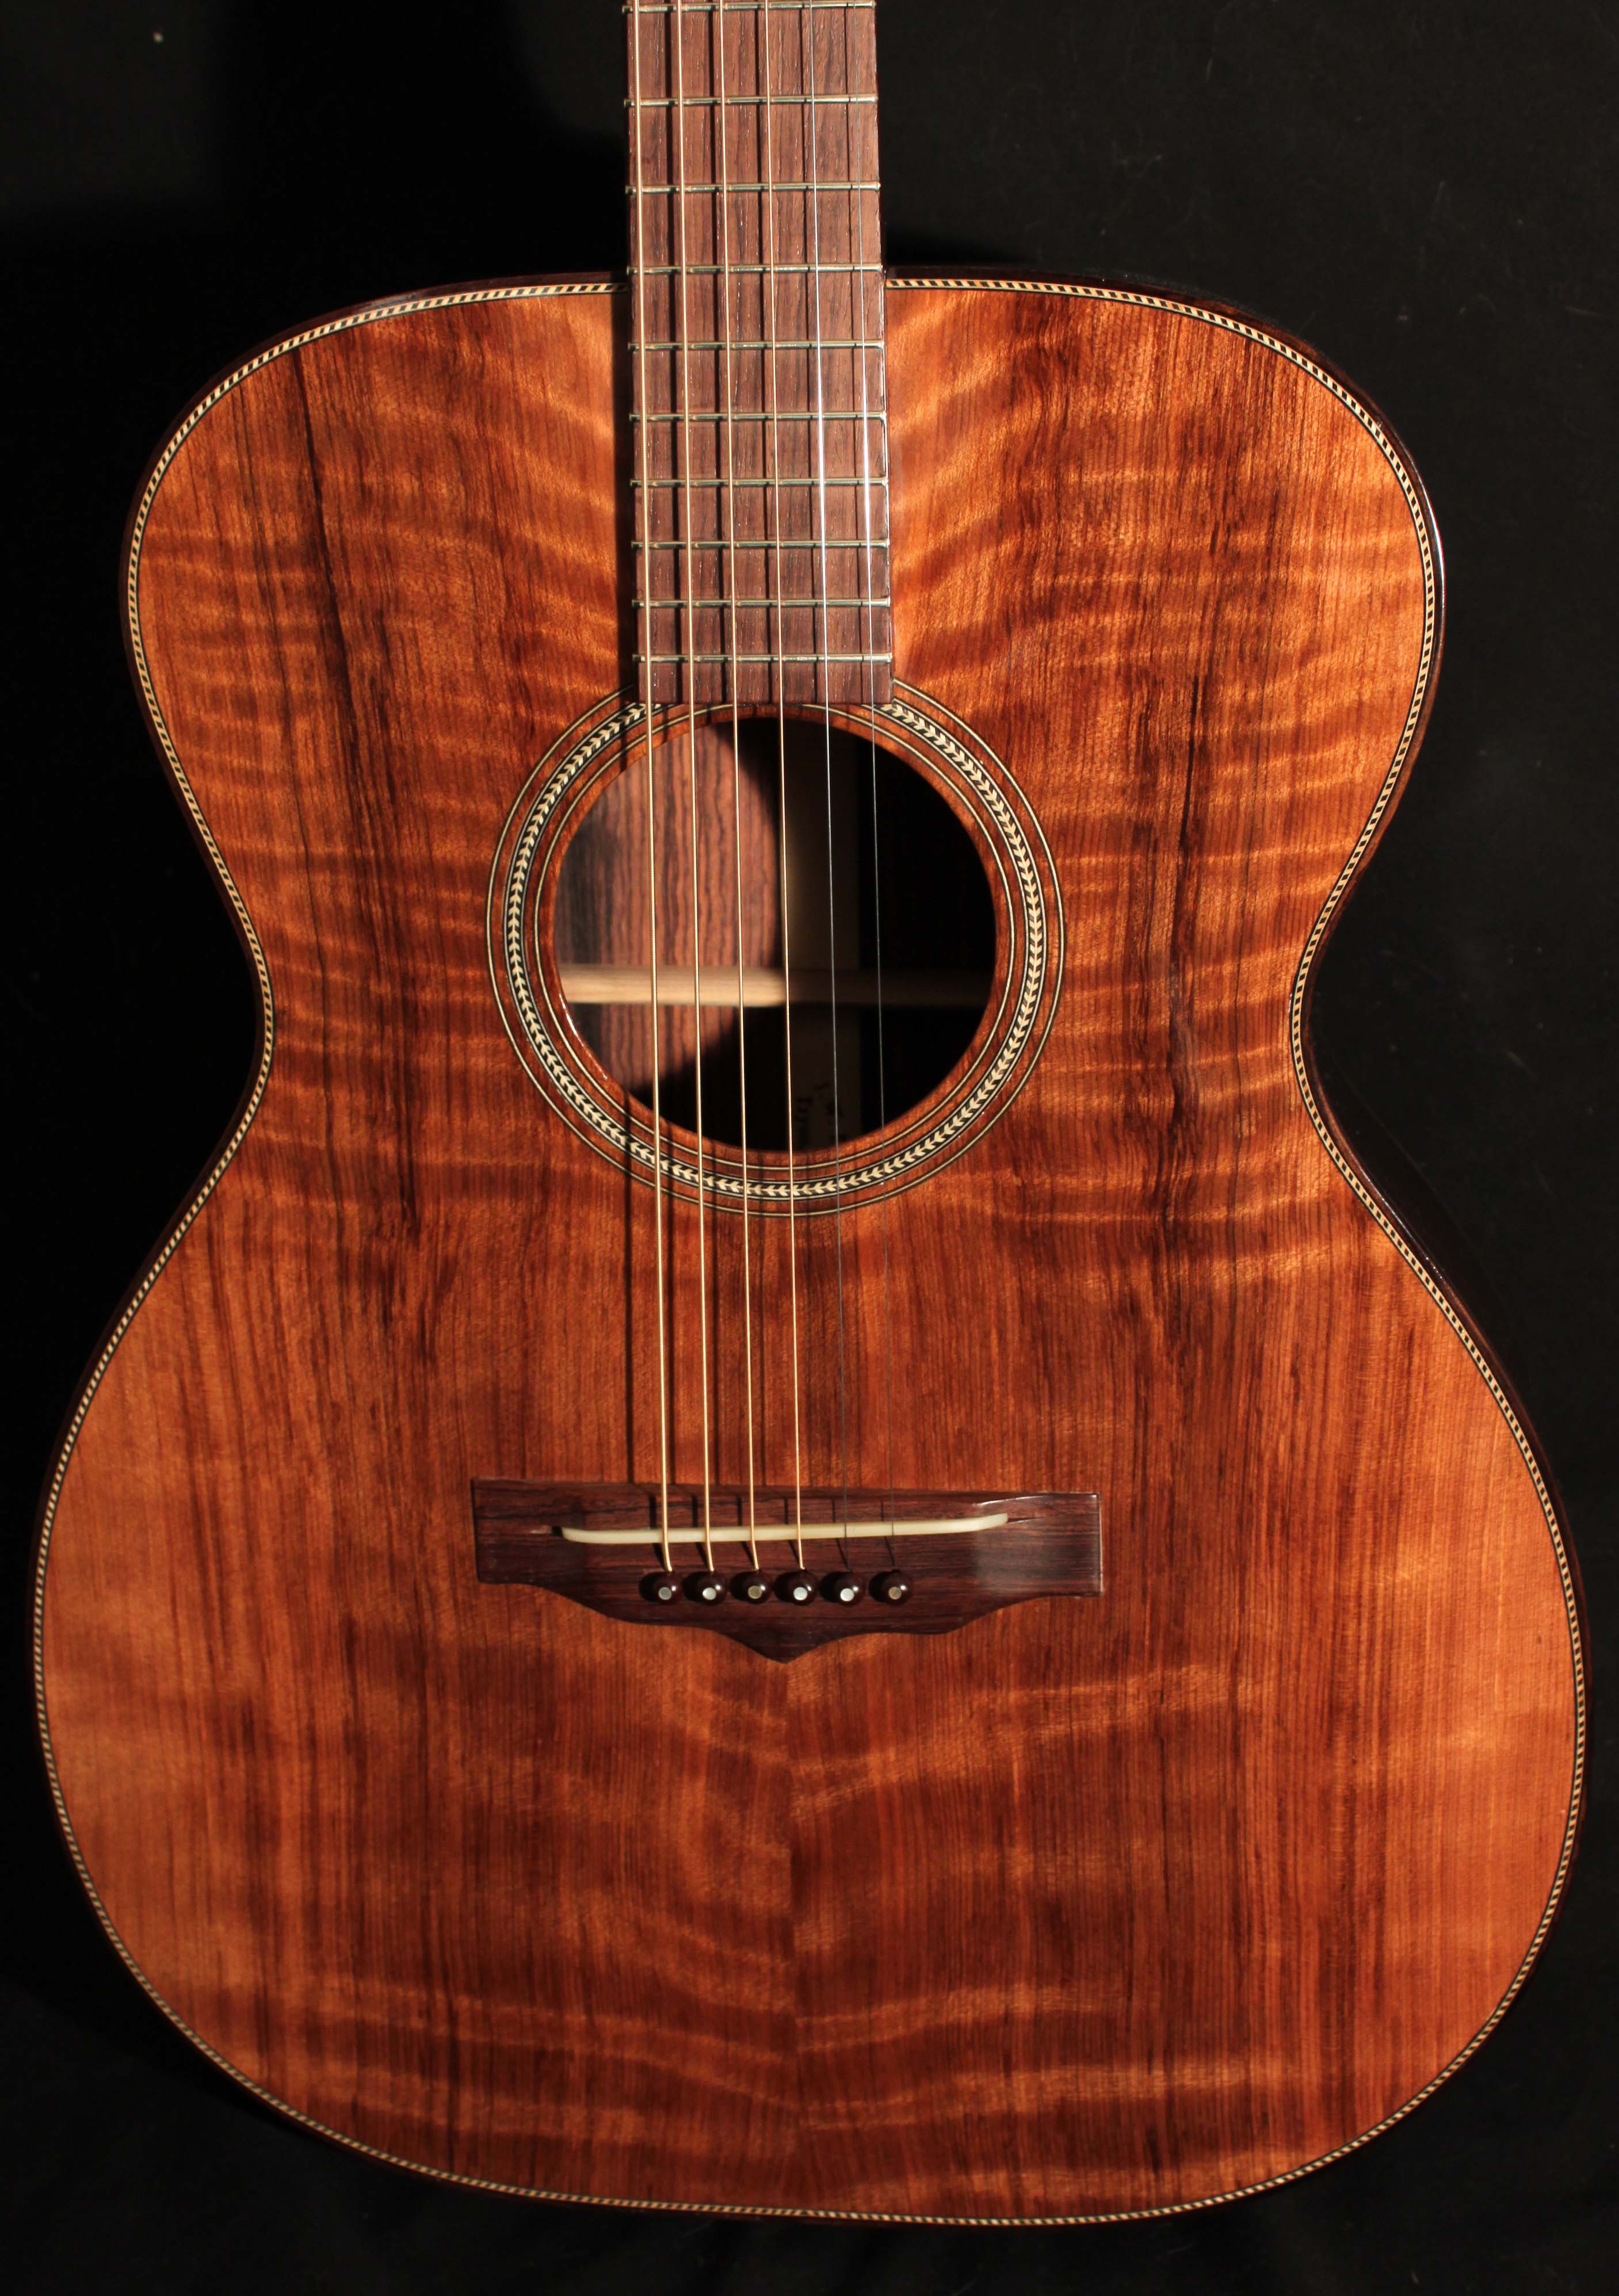 Curly Redwood Top on Indian Rosewood Guitar, Lichty Guitars